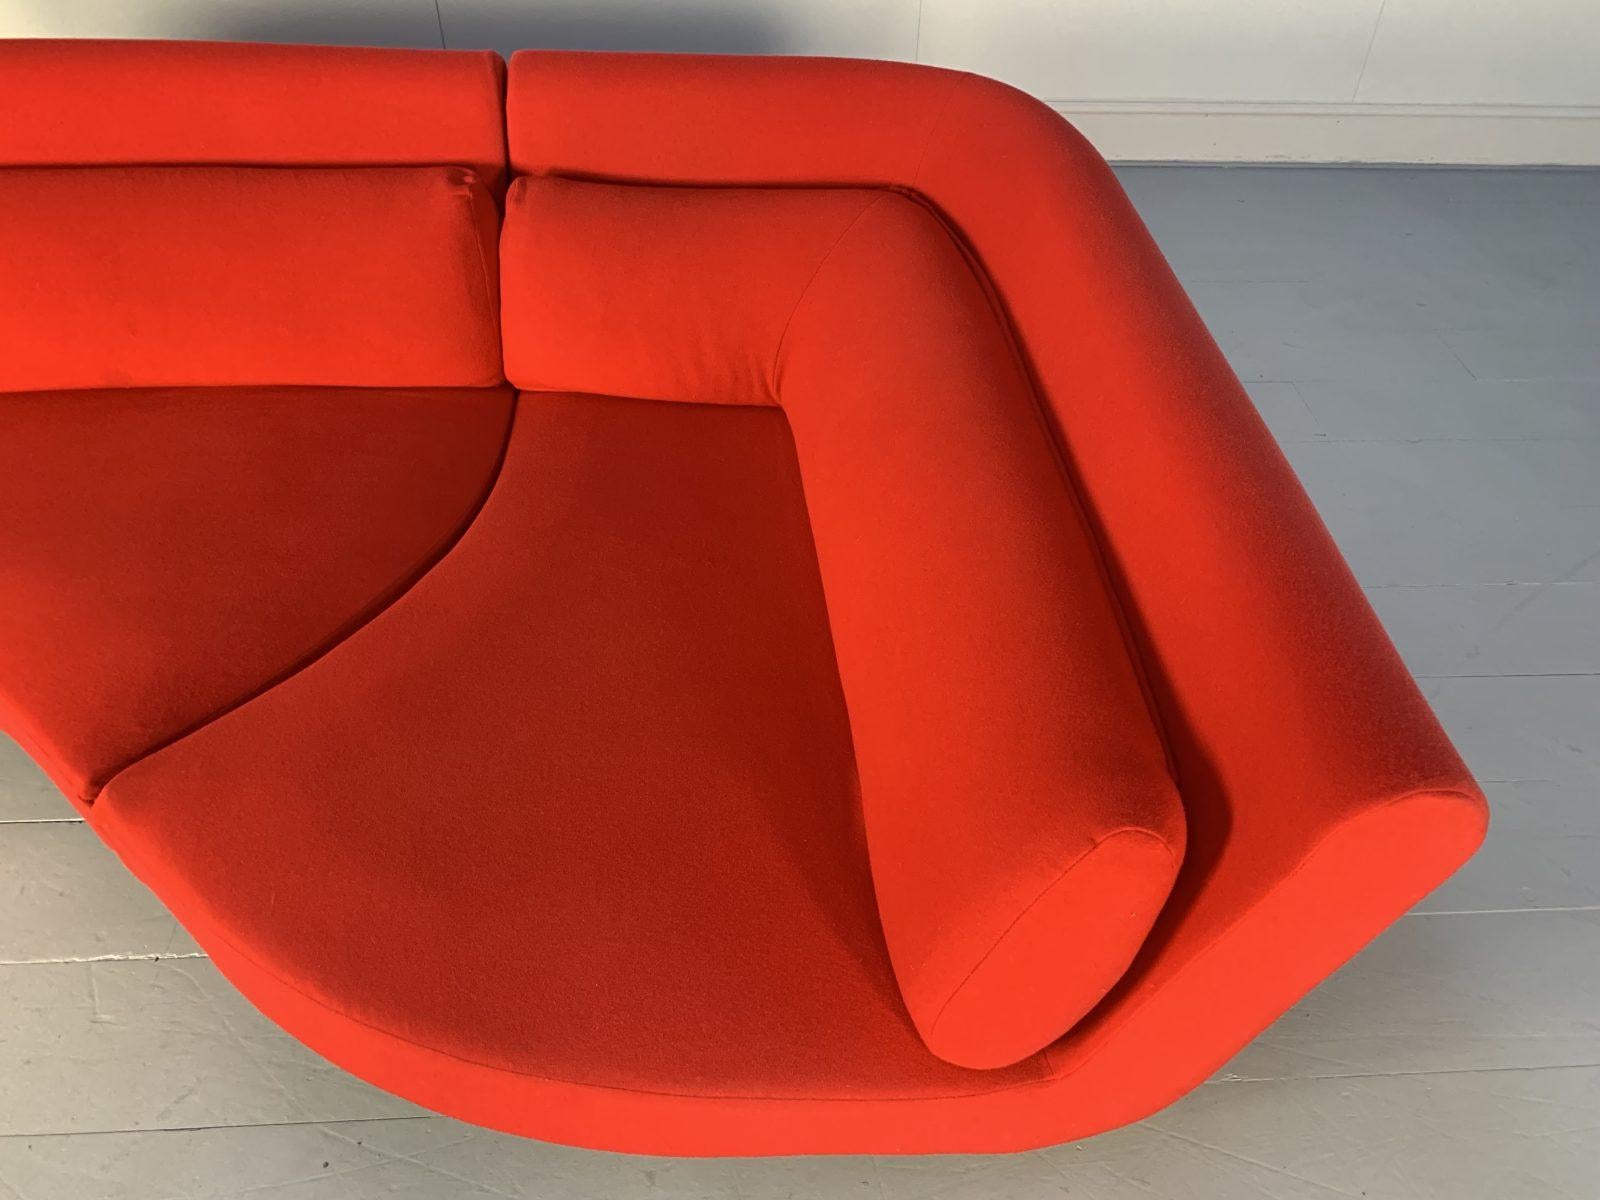 Ligne Roset “Yang” Sofa, in Red Kvadrat “Divina” Fabric In Good Condition For Sale In Barrowford, GB